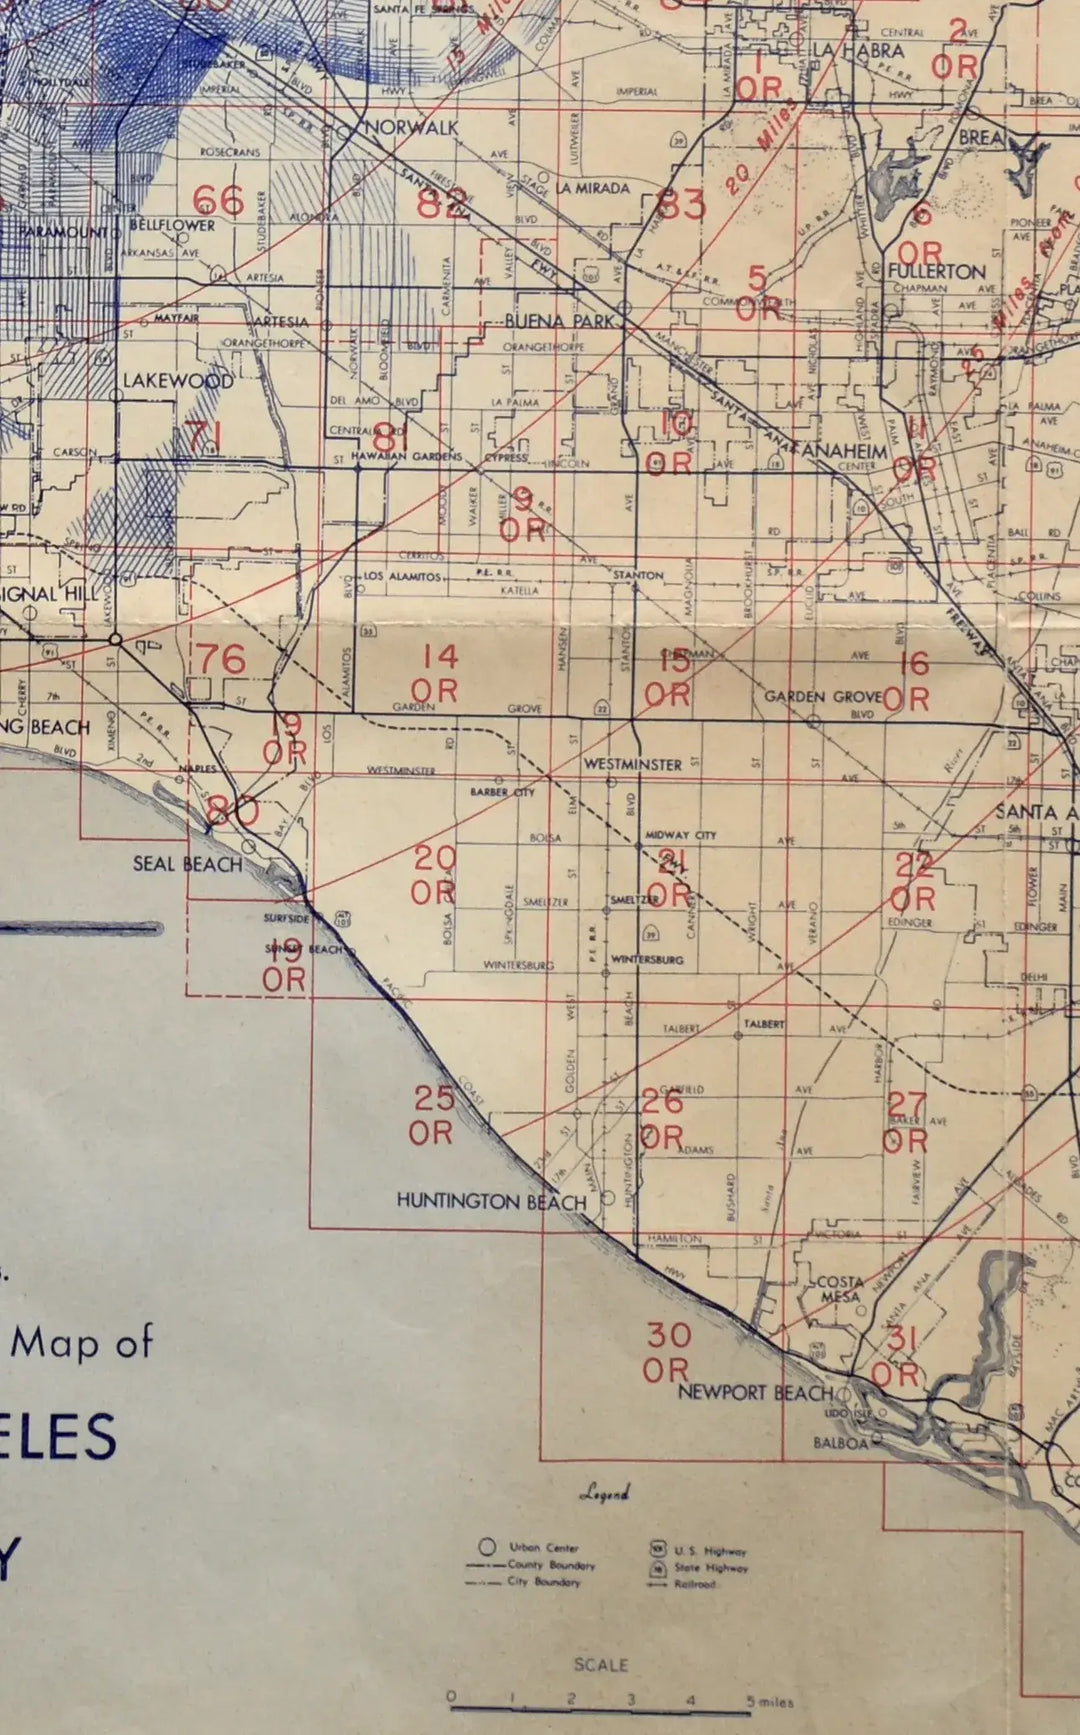 An old Ed Fairburn | "Los Angeles I" map of Los Angeles.